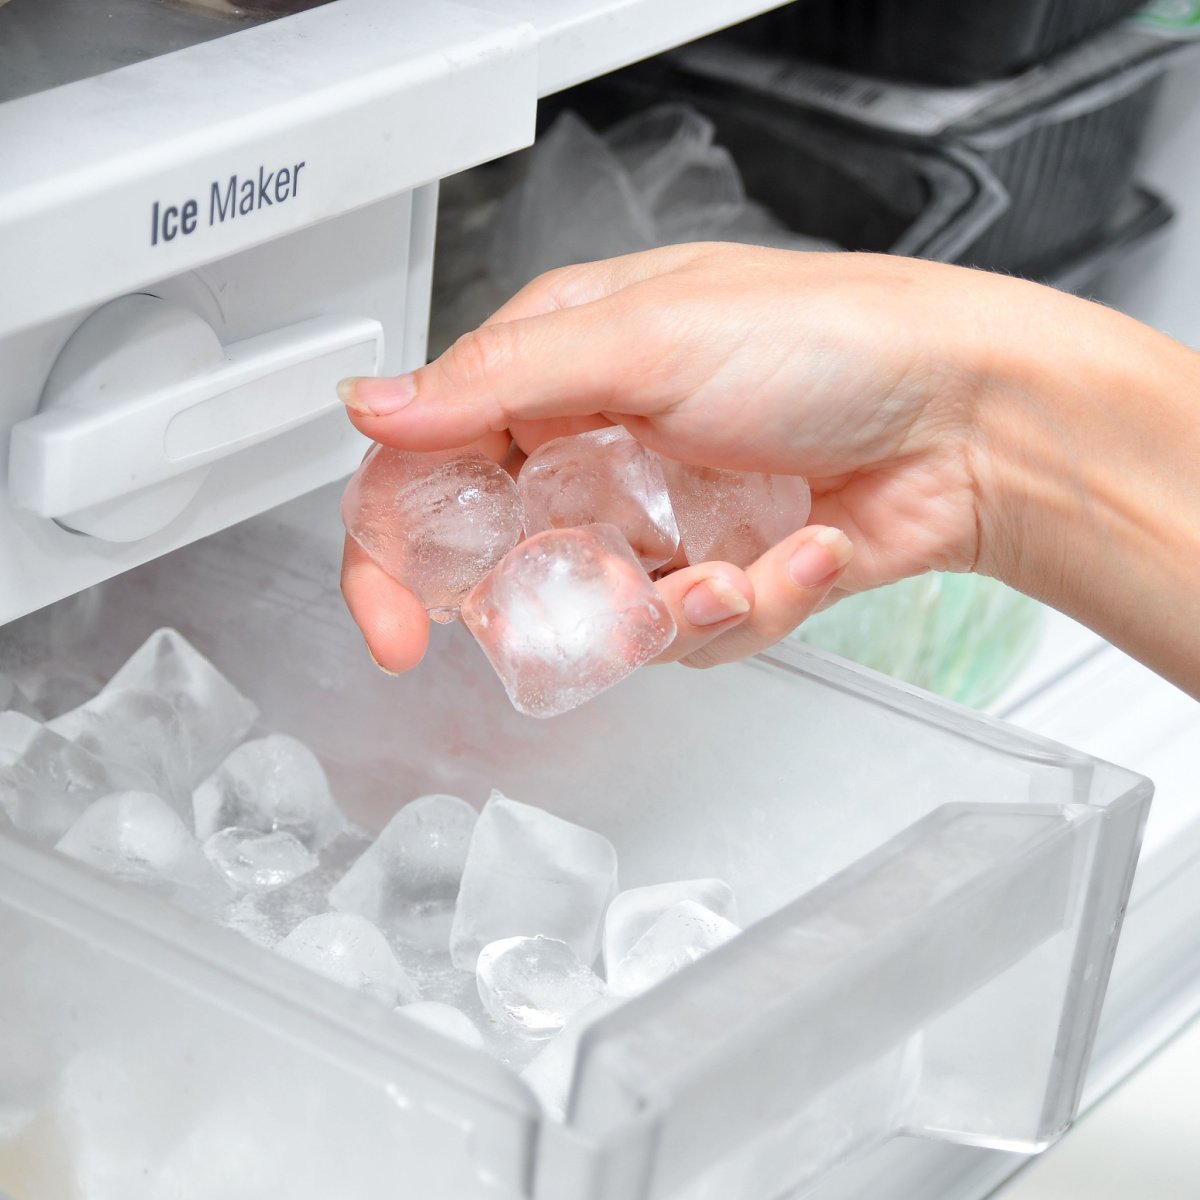 nugget ice maker full of ice cubes